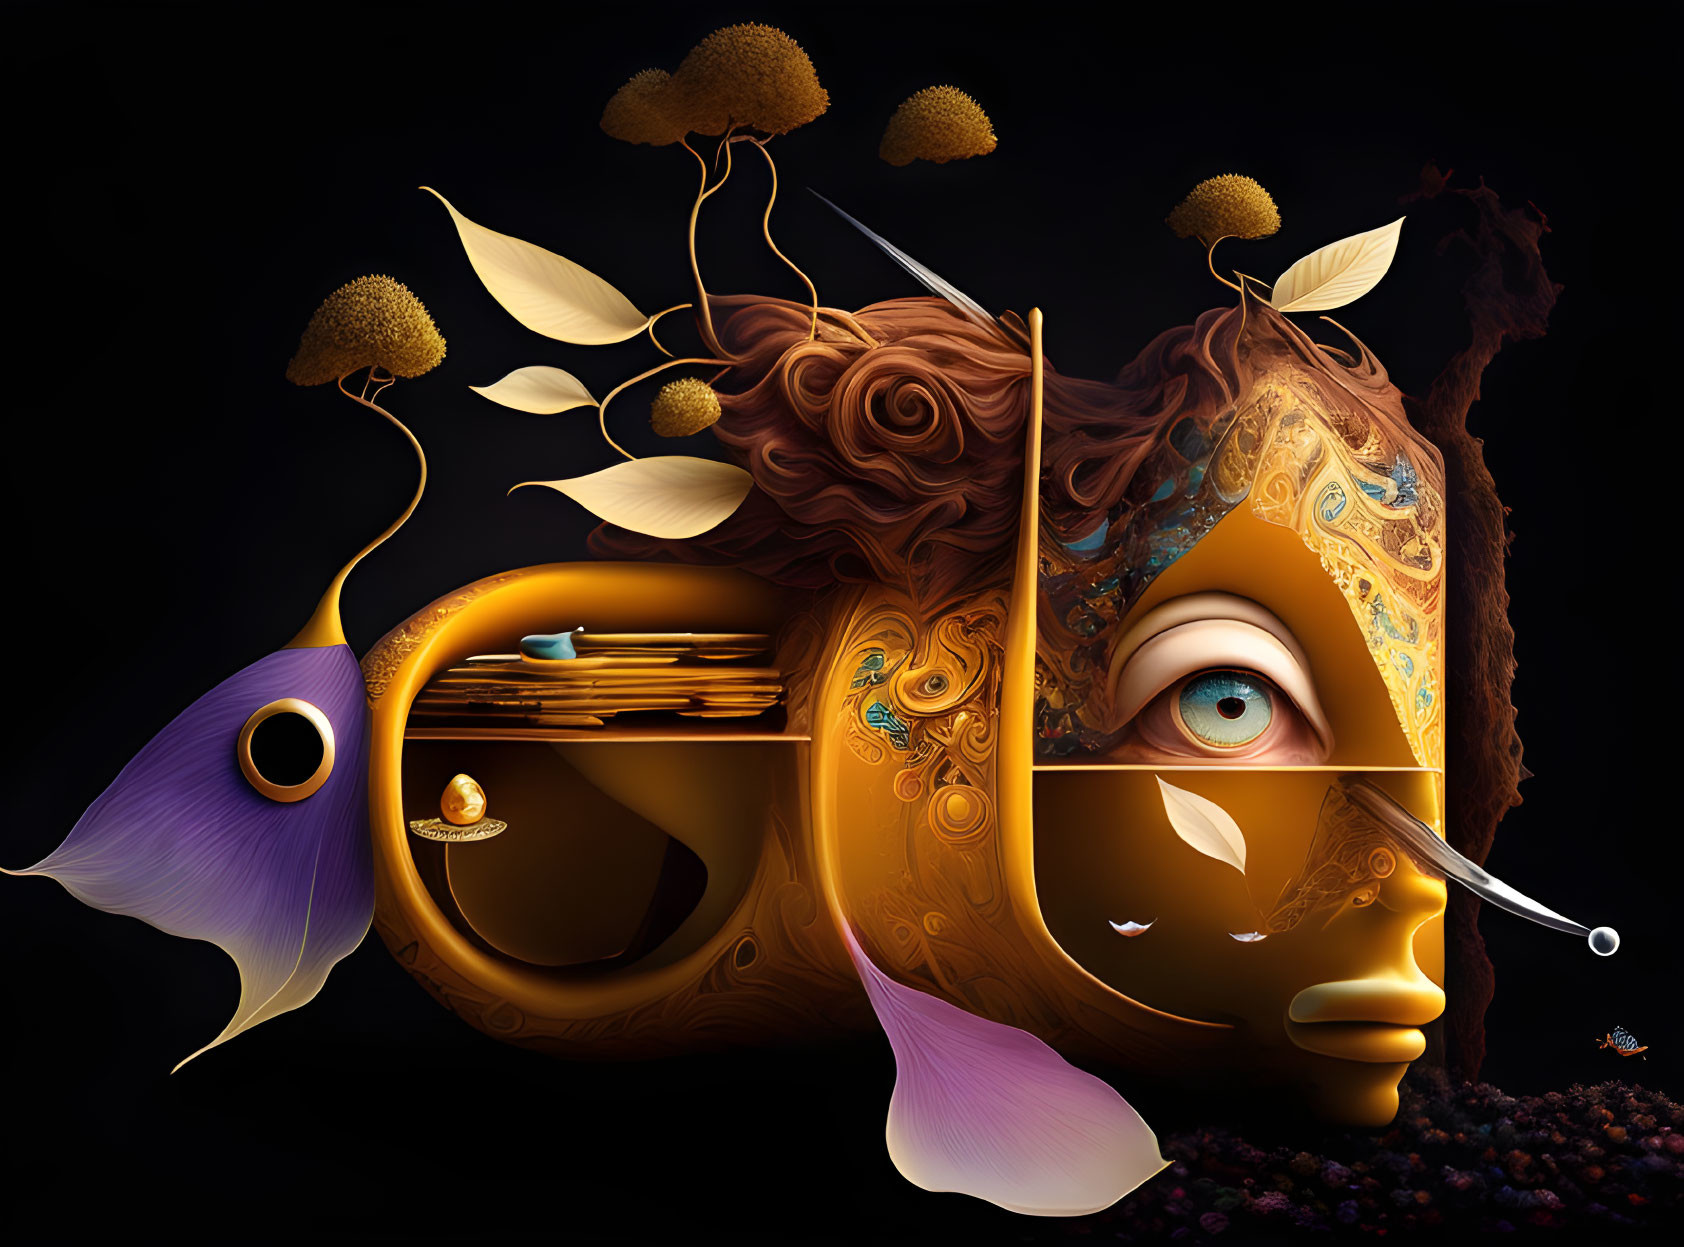 Surreal digital art: woman's face with musical landscape, flowers, fish on dark backdrop